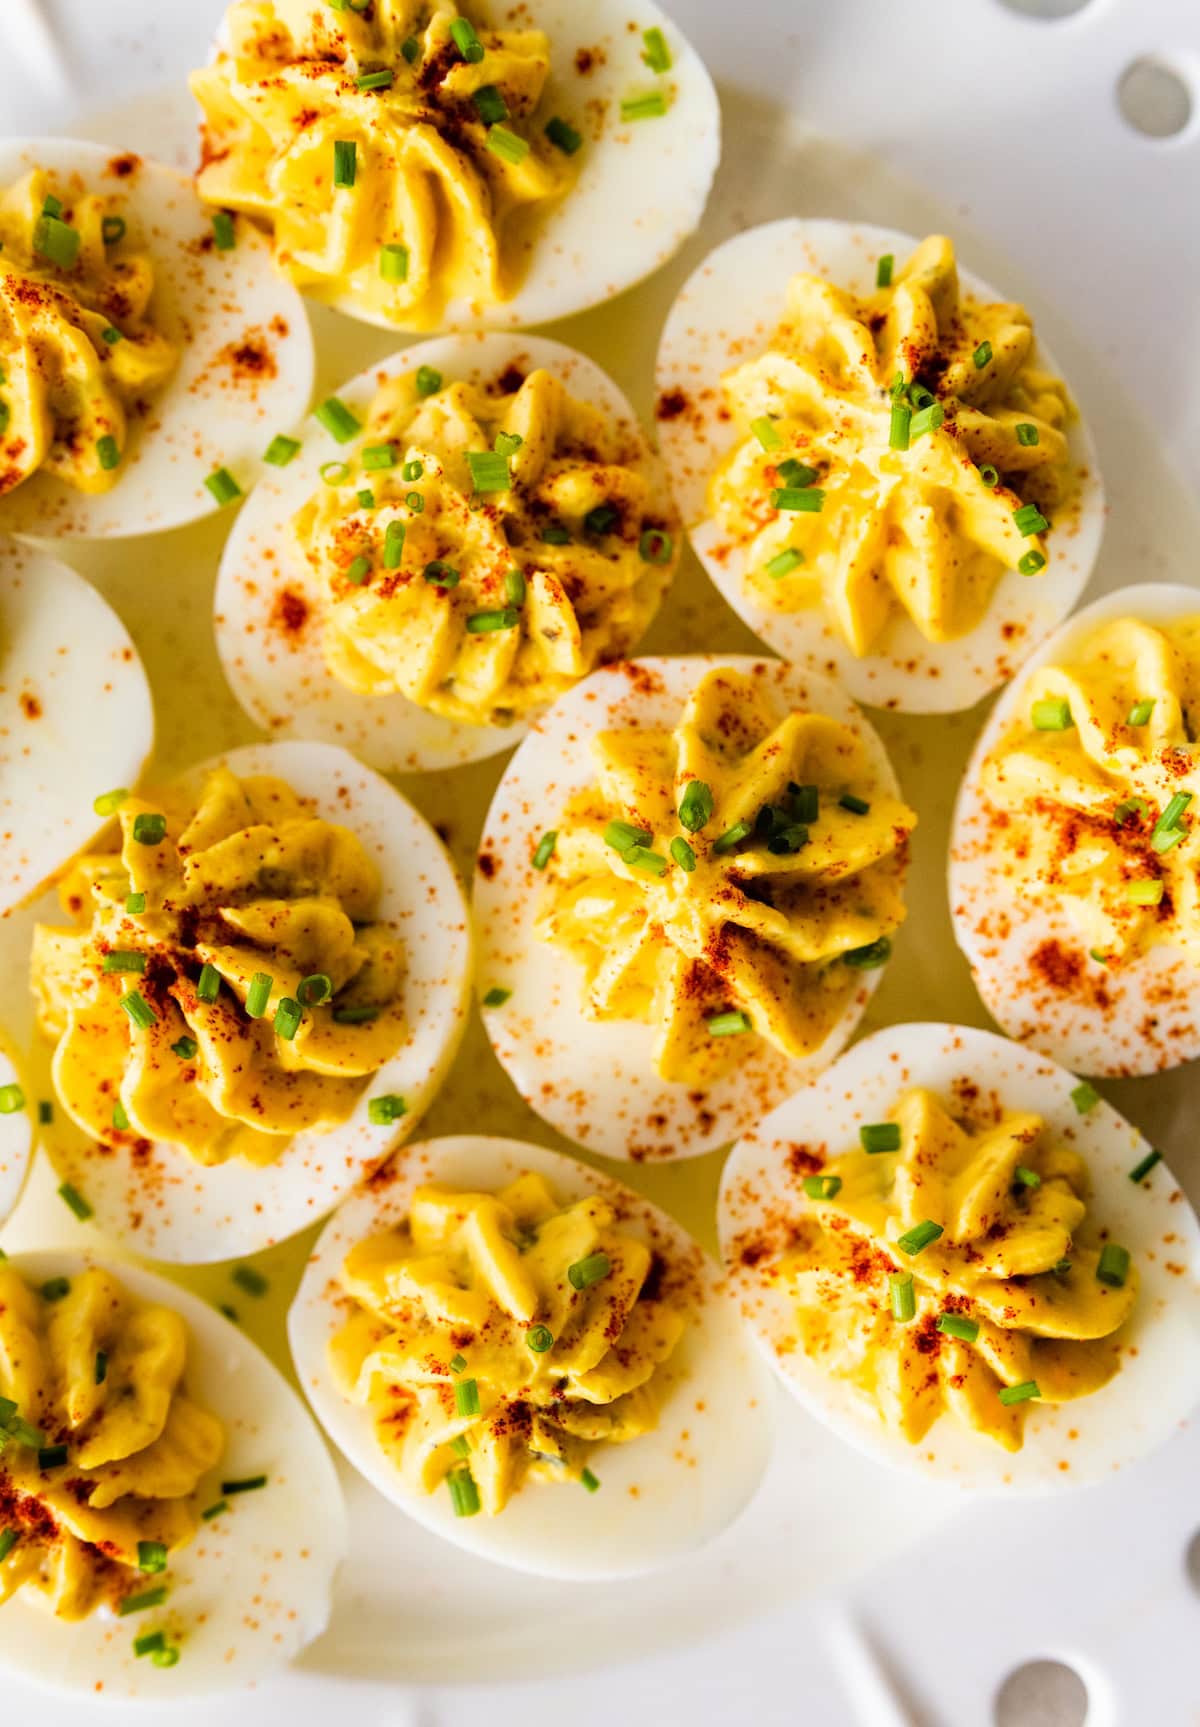 Healthy deviled eggs on a plate.